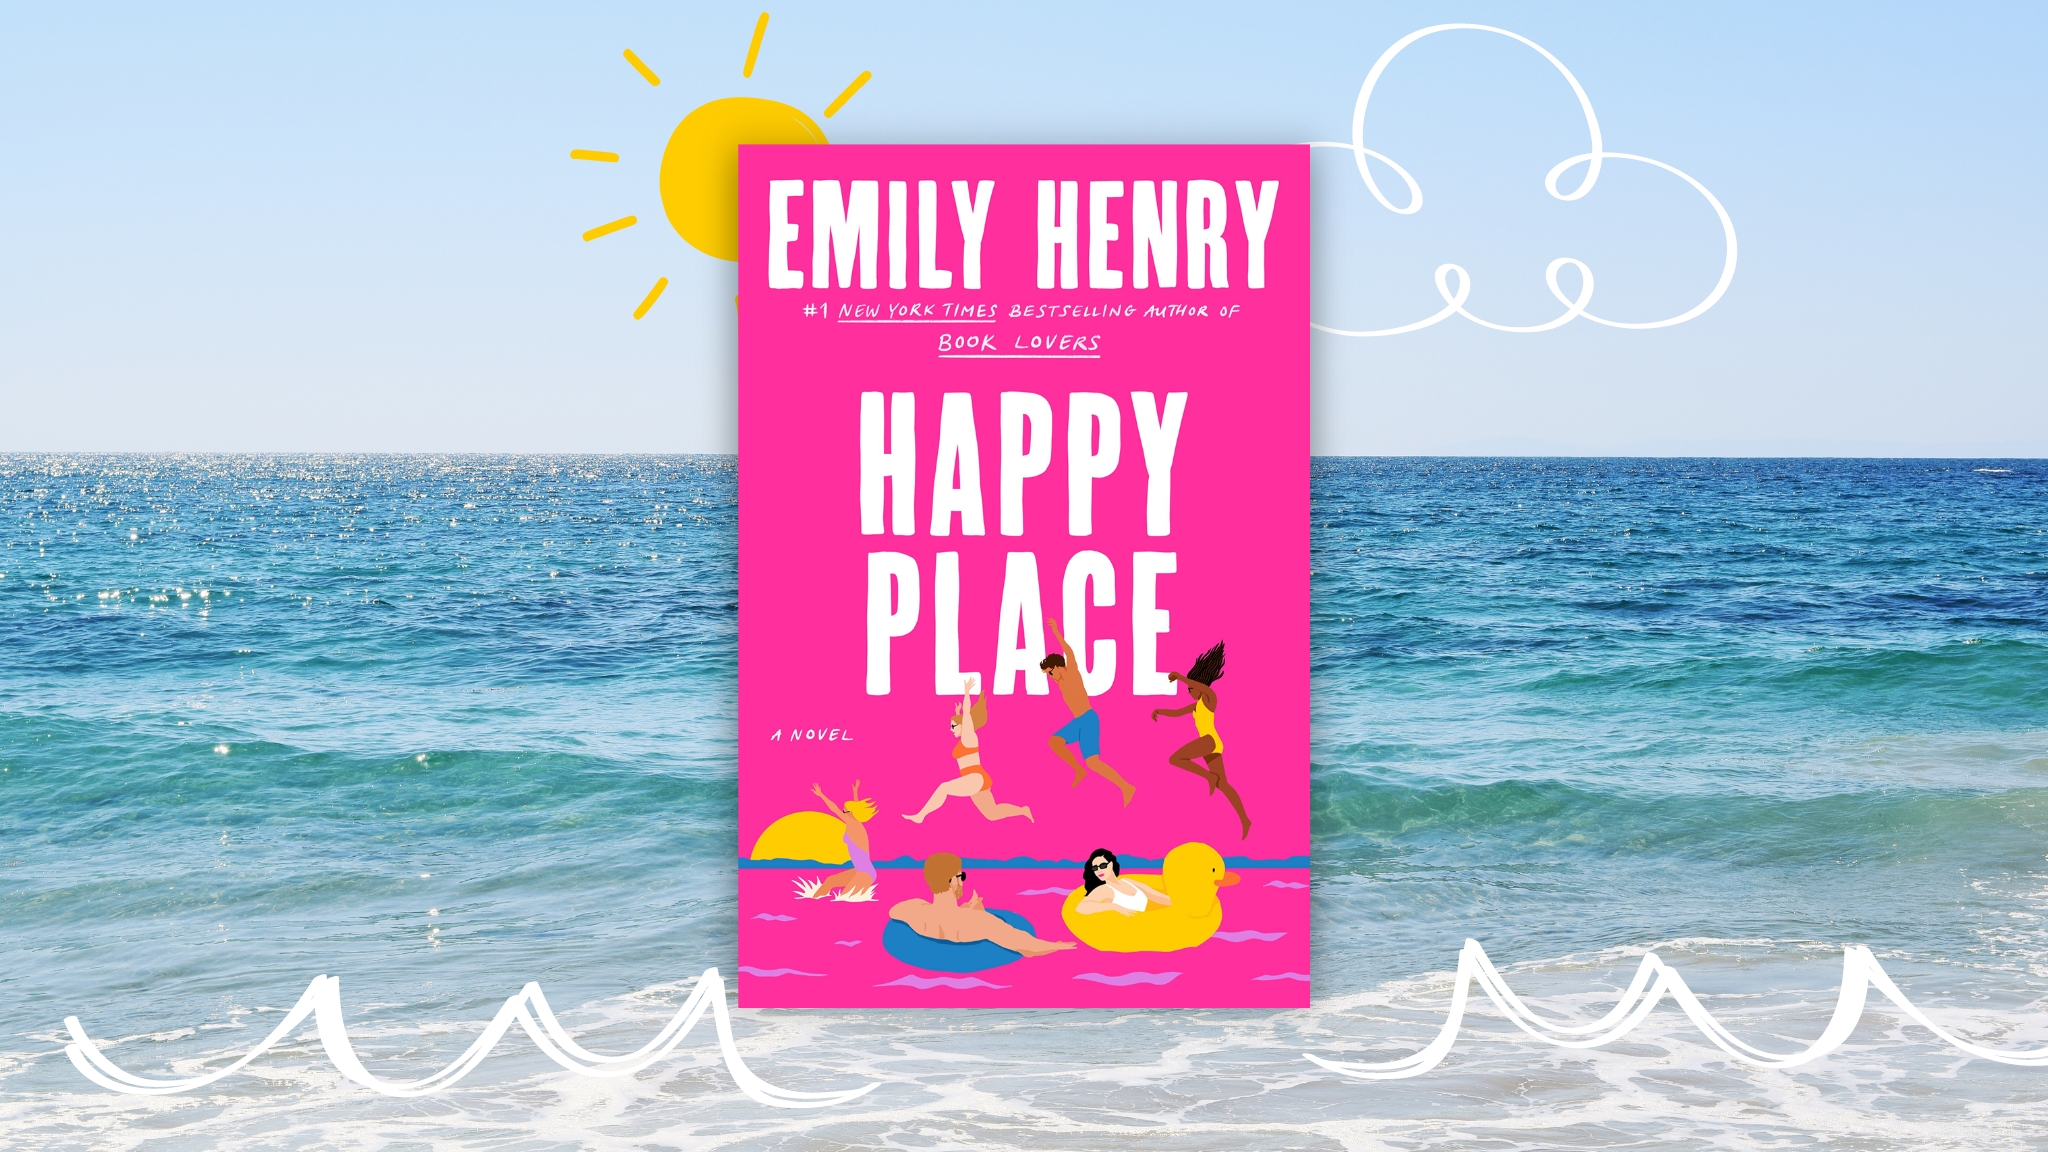 Travel to Your “Happy Place” with Emily Henry's Newest Romance | BookTrib.